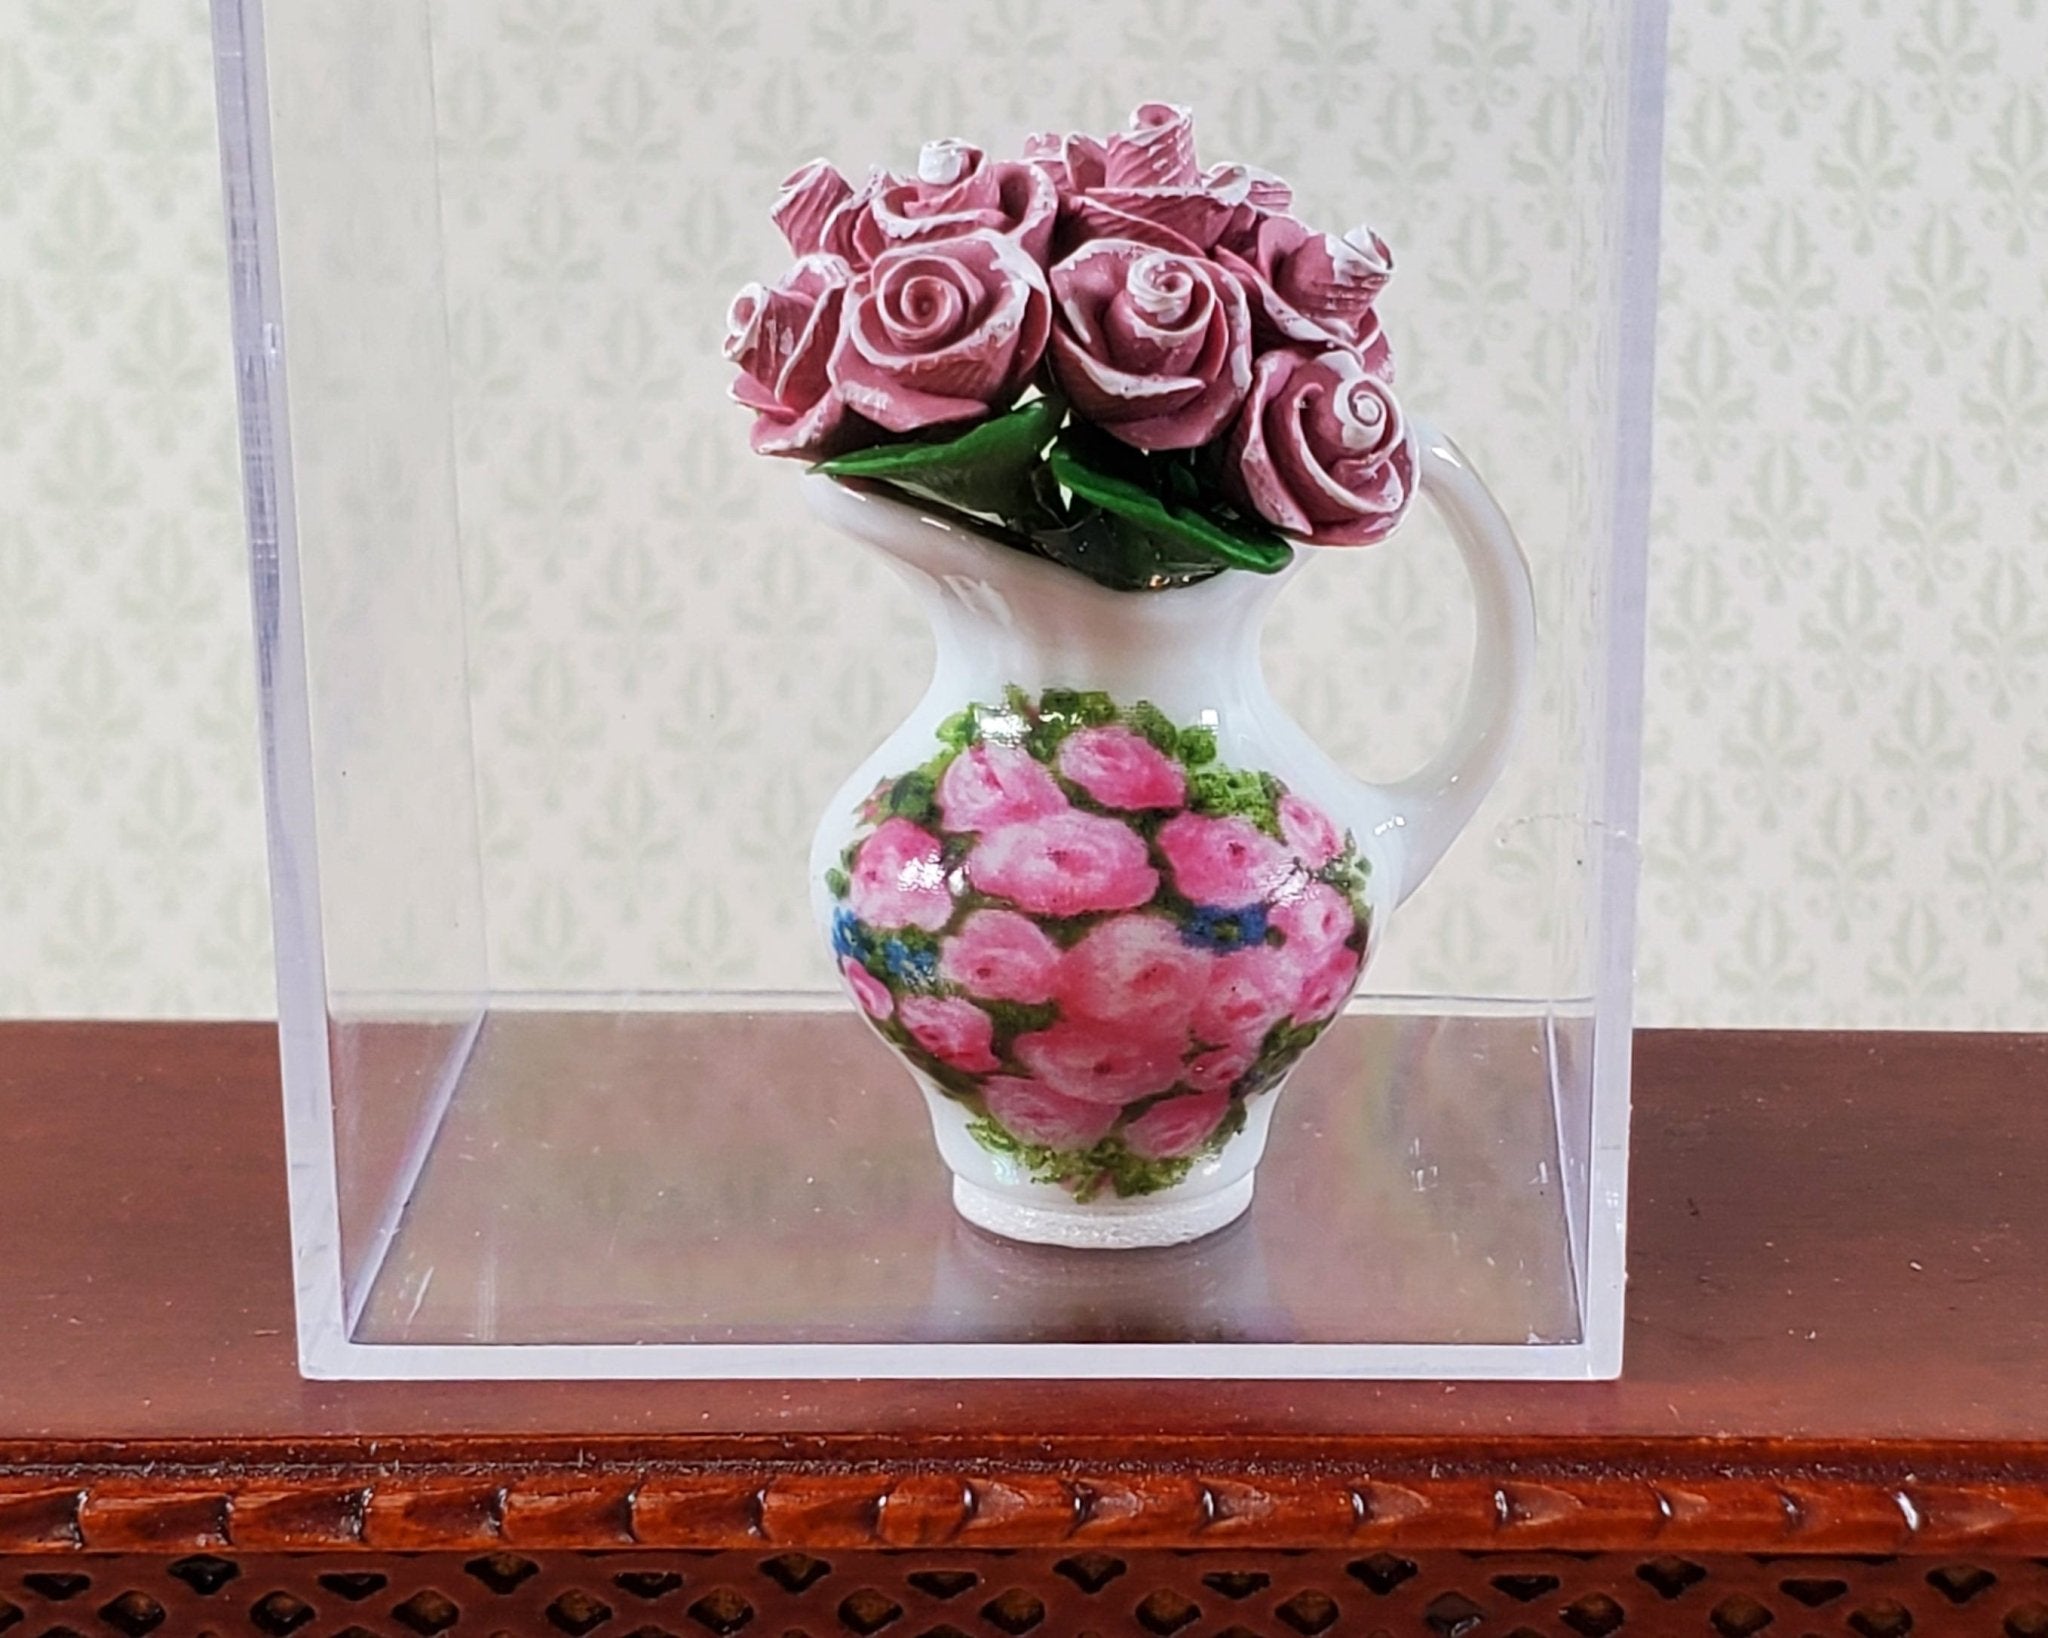 Dollhouse Red Roses in a Blue and White Ceramic Pot 1:12 Scale